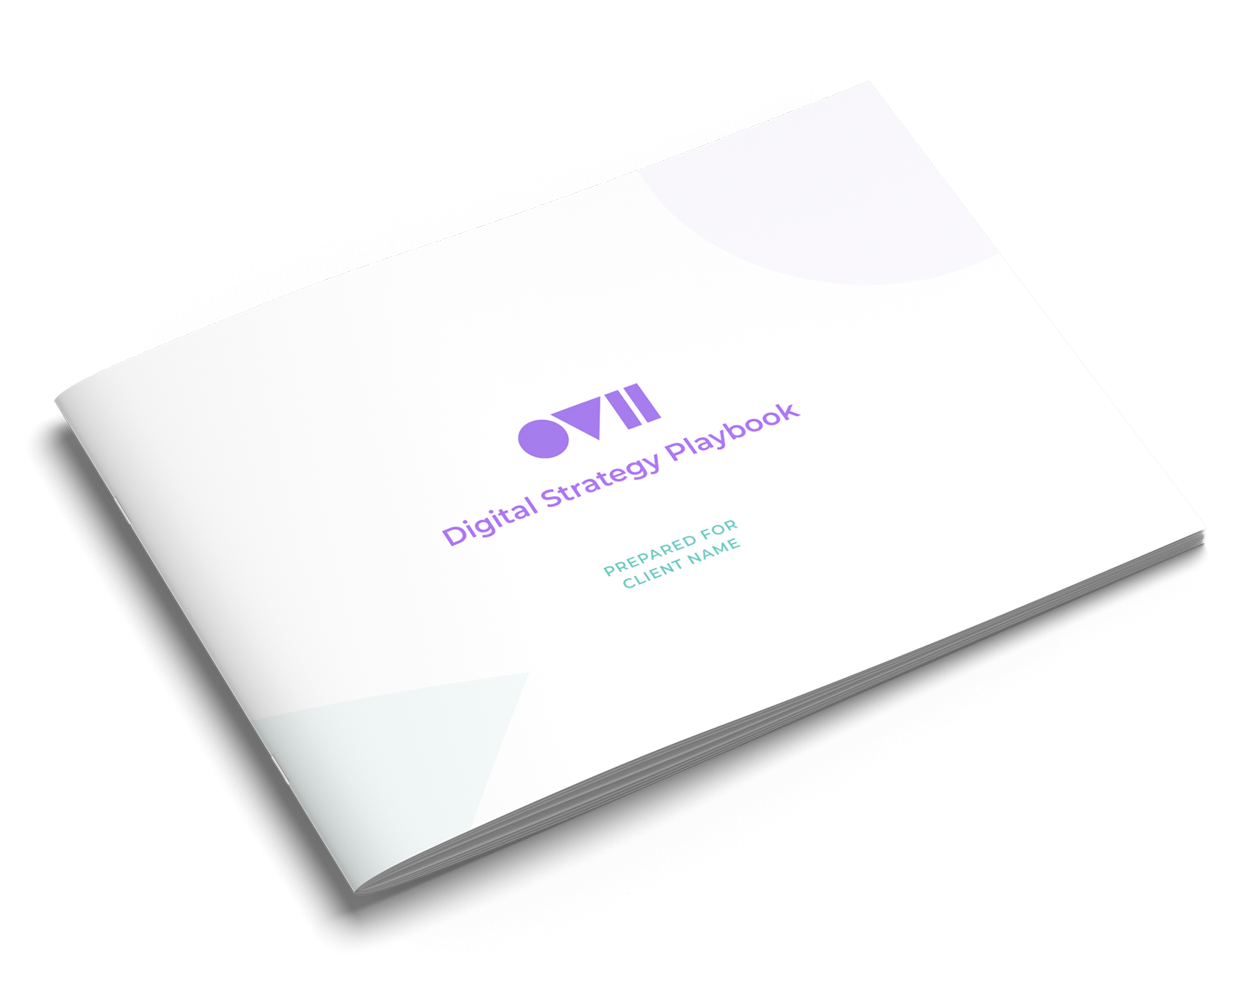 image of a physical digital strategy playbook created by ovii for a client